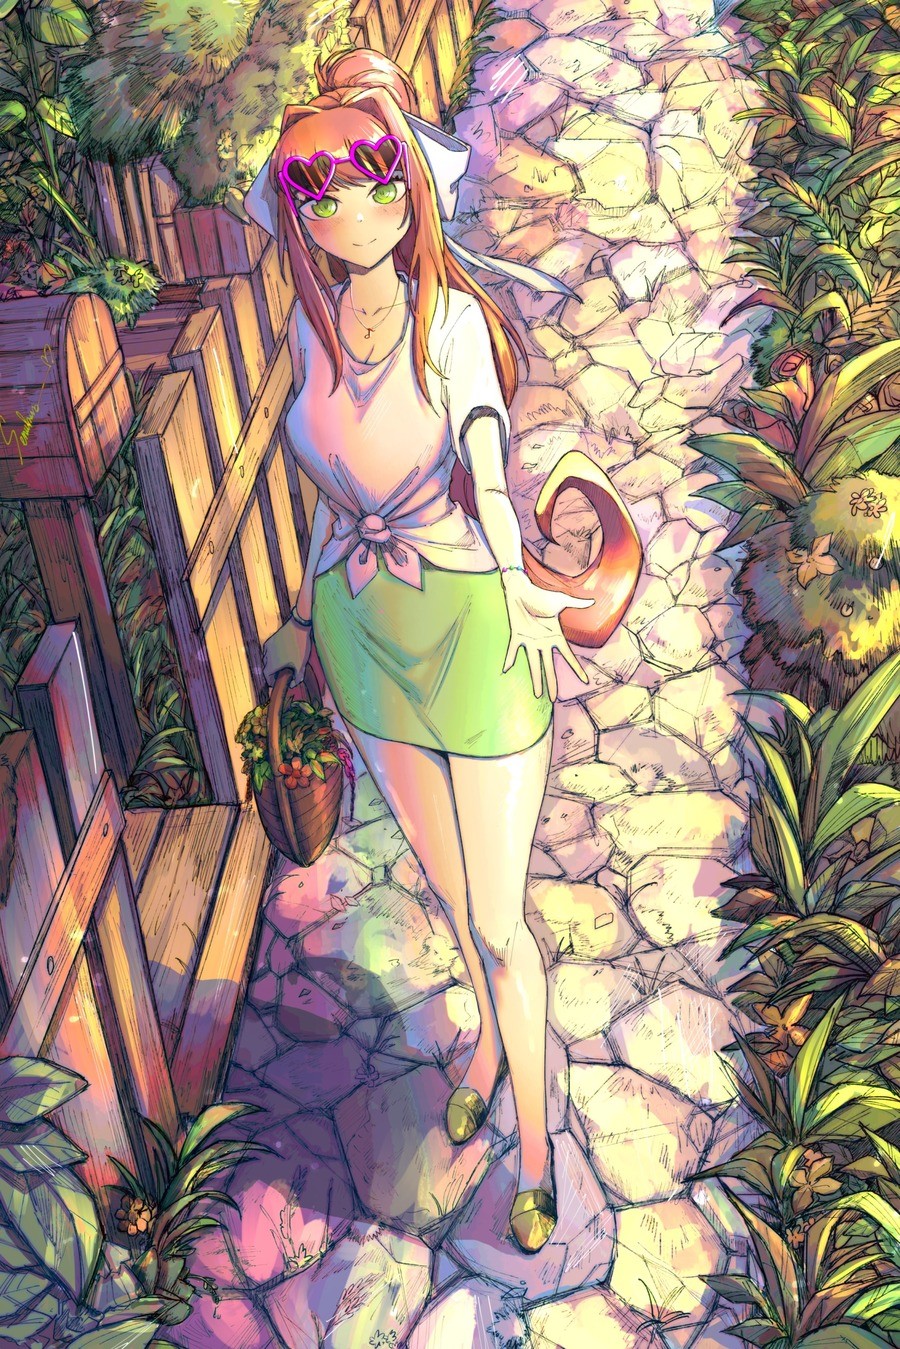 Daily Monika 1211: Photography special - nature is its own poem.. I just got back from a nice long walk in a park near me. I took a bunch of pictures, so I hope